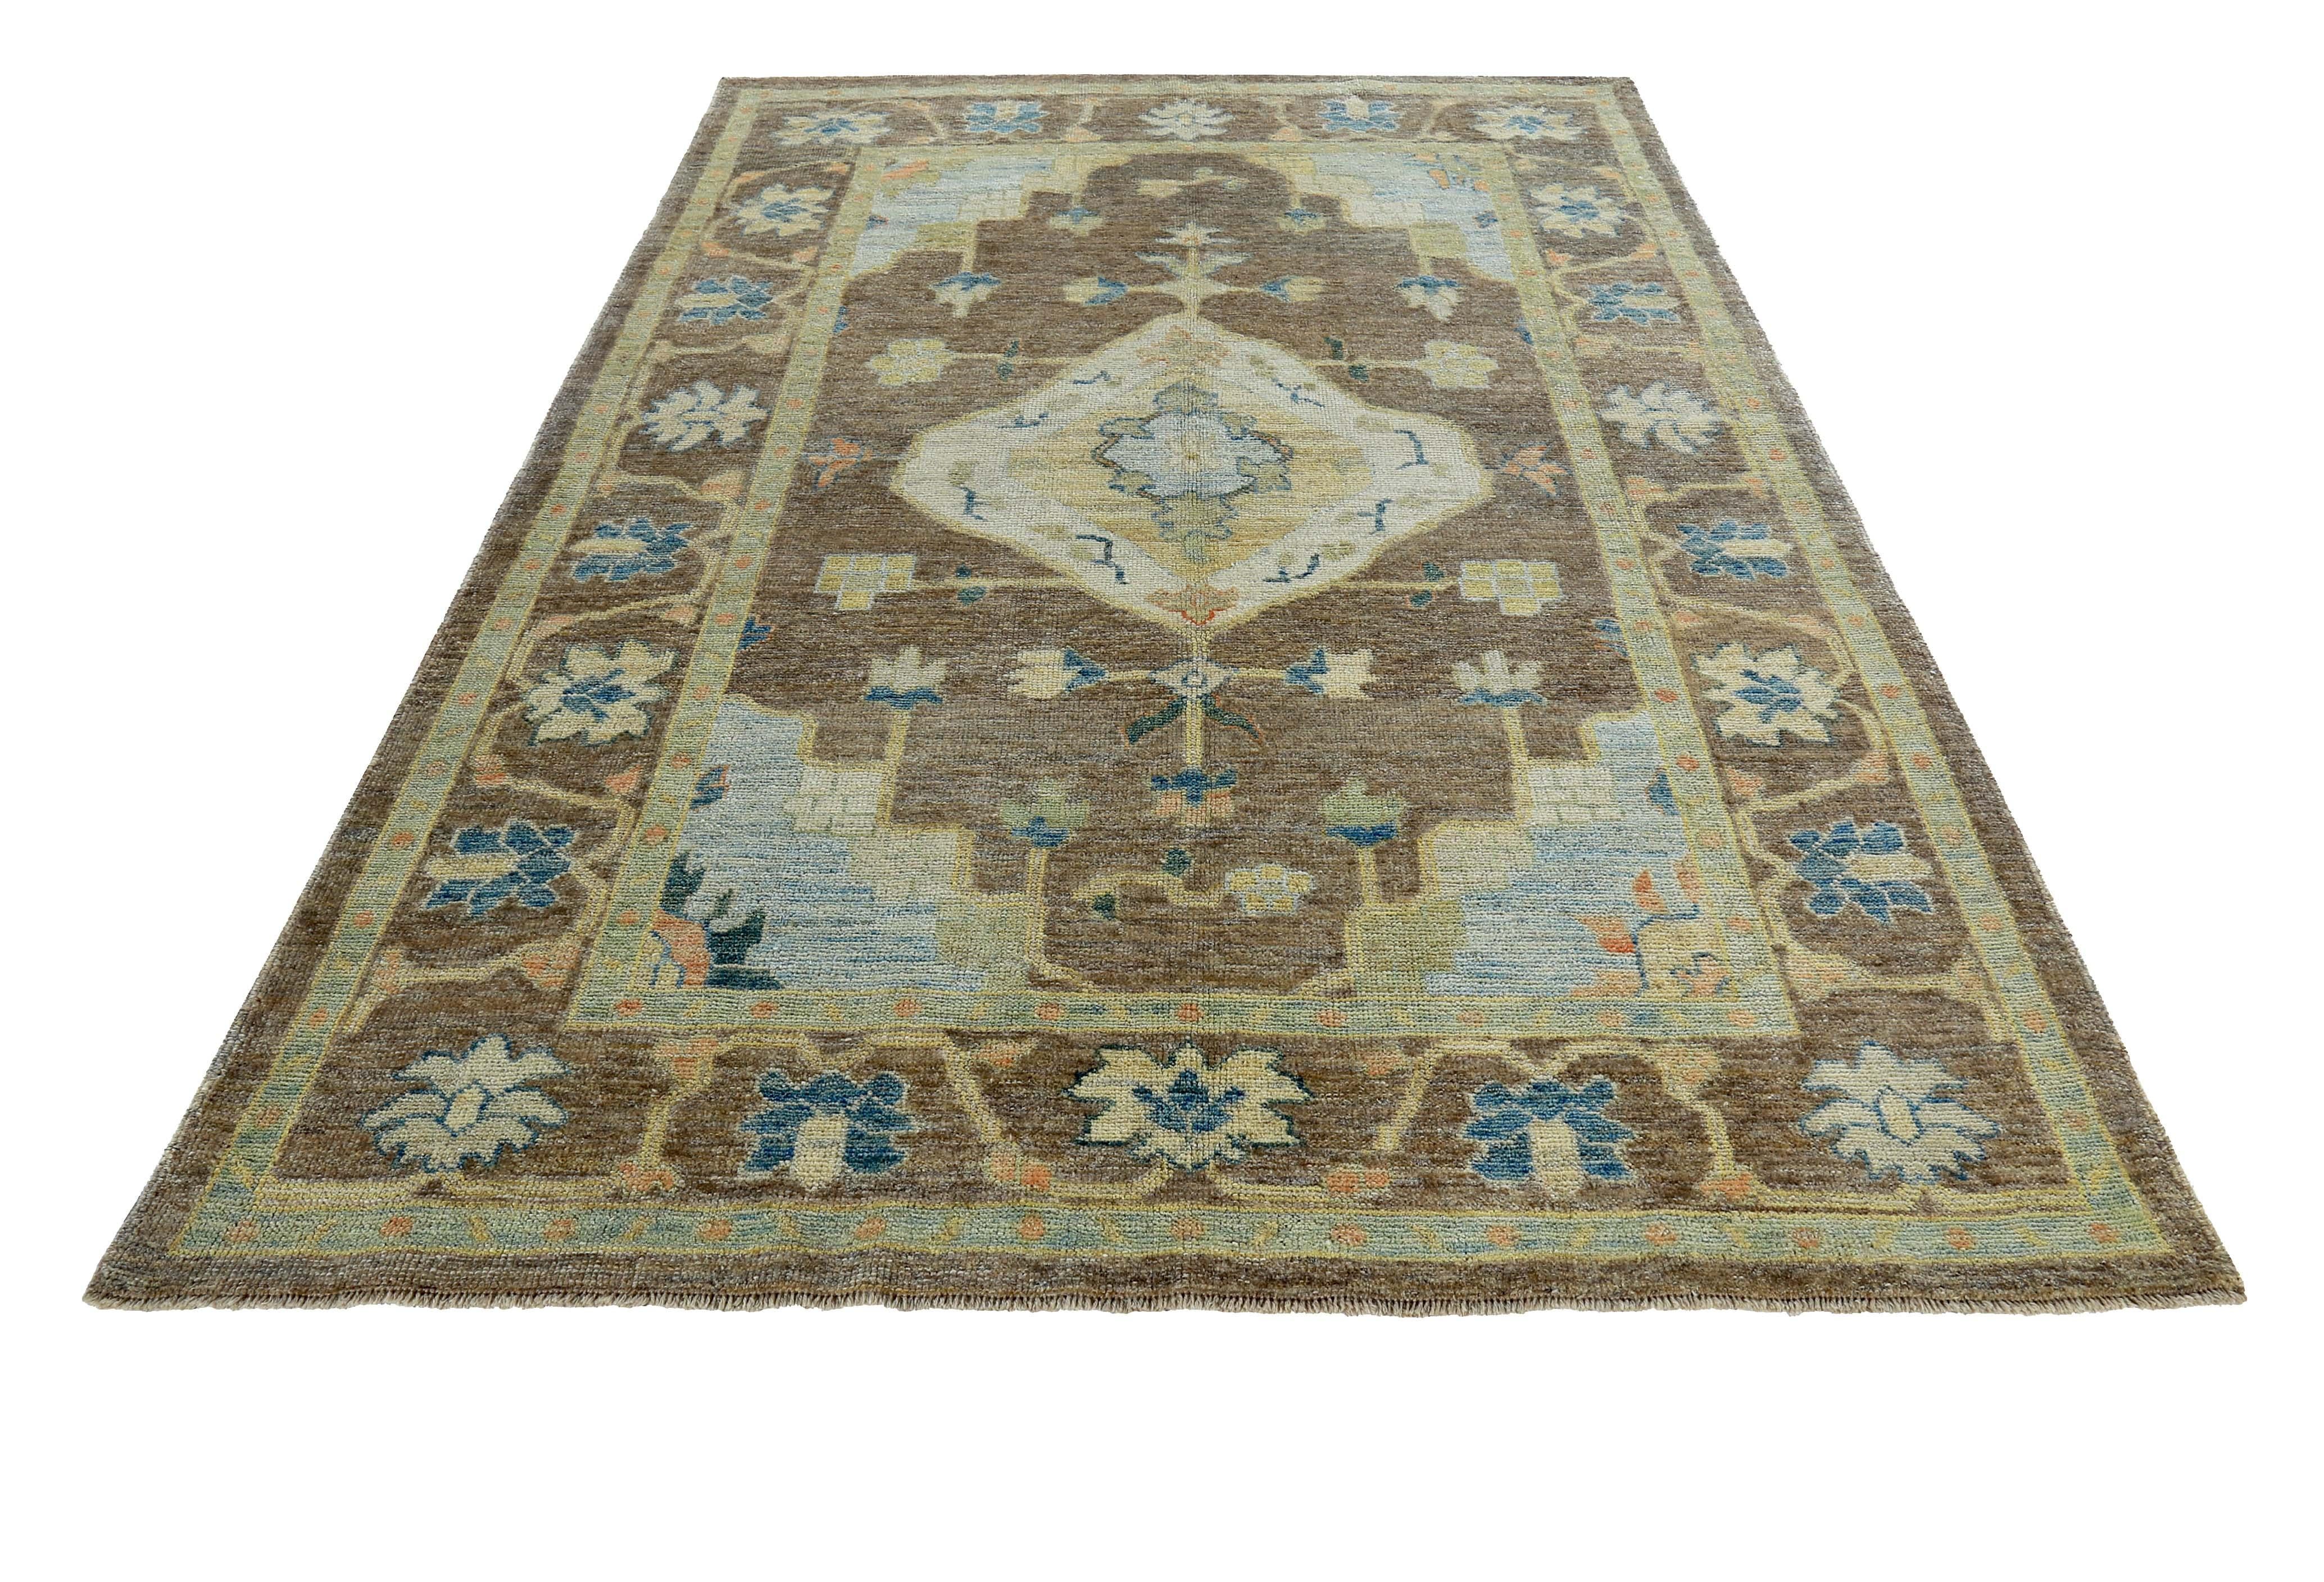 Turkish rug made of handwoven sheep’s wool of the finest quality. It’s colored with organic vegetable dyes that are certified safe for humans and pets alike. It features navy blue and ivory flower heads on a beautiful brown field. Flower patterns